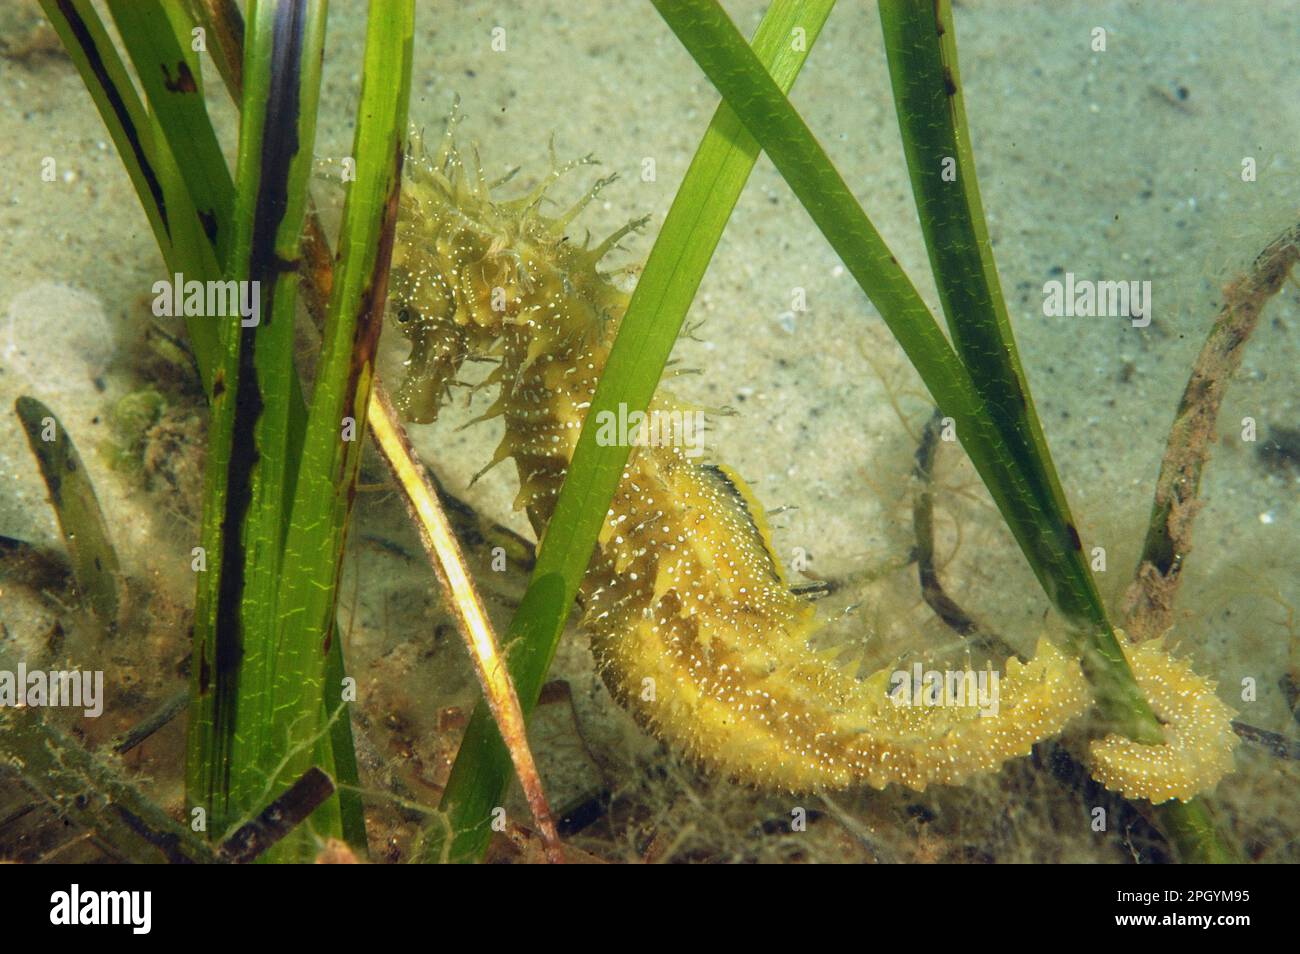 Long-snouted Seahorse (Hippocampus guttulatus) adult male, pregnant, clinging to eelgrass, Studland Bay, Dorset, England, United Kingdom Stock Photo